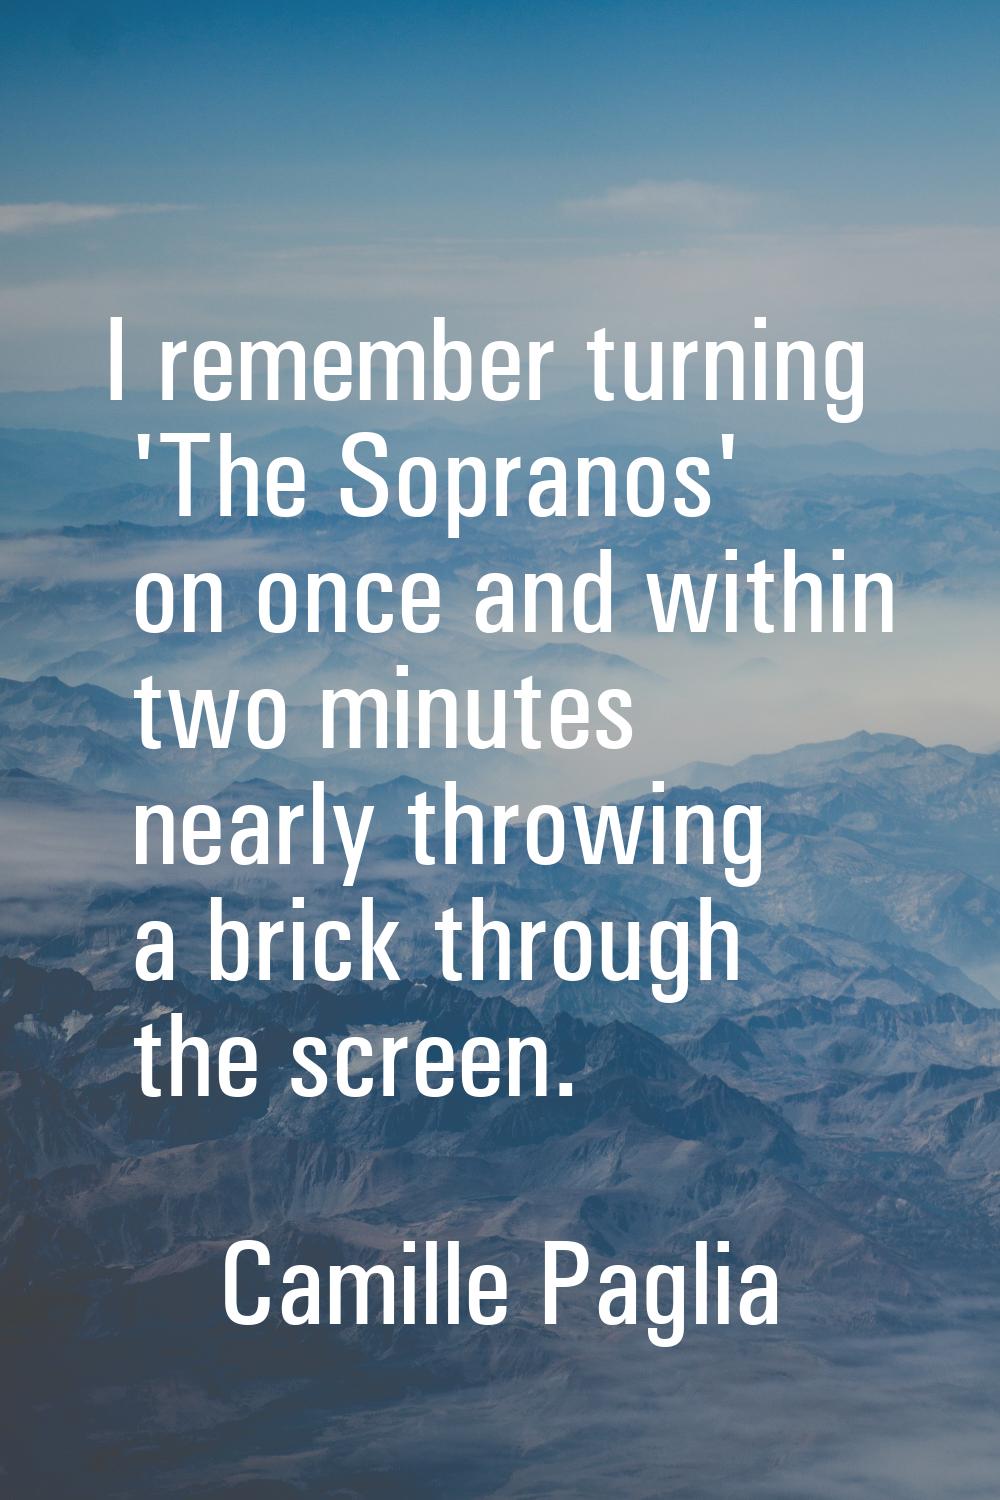 I remember turning 'The Sopranos' on once and within two minutes nearly throwing a brick through th